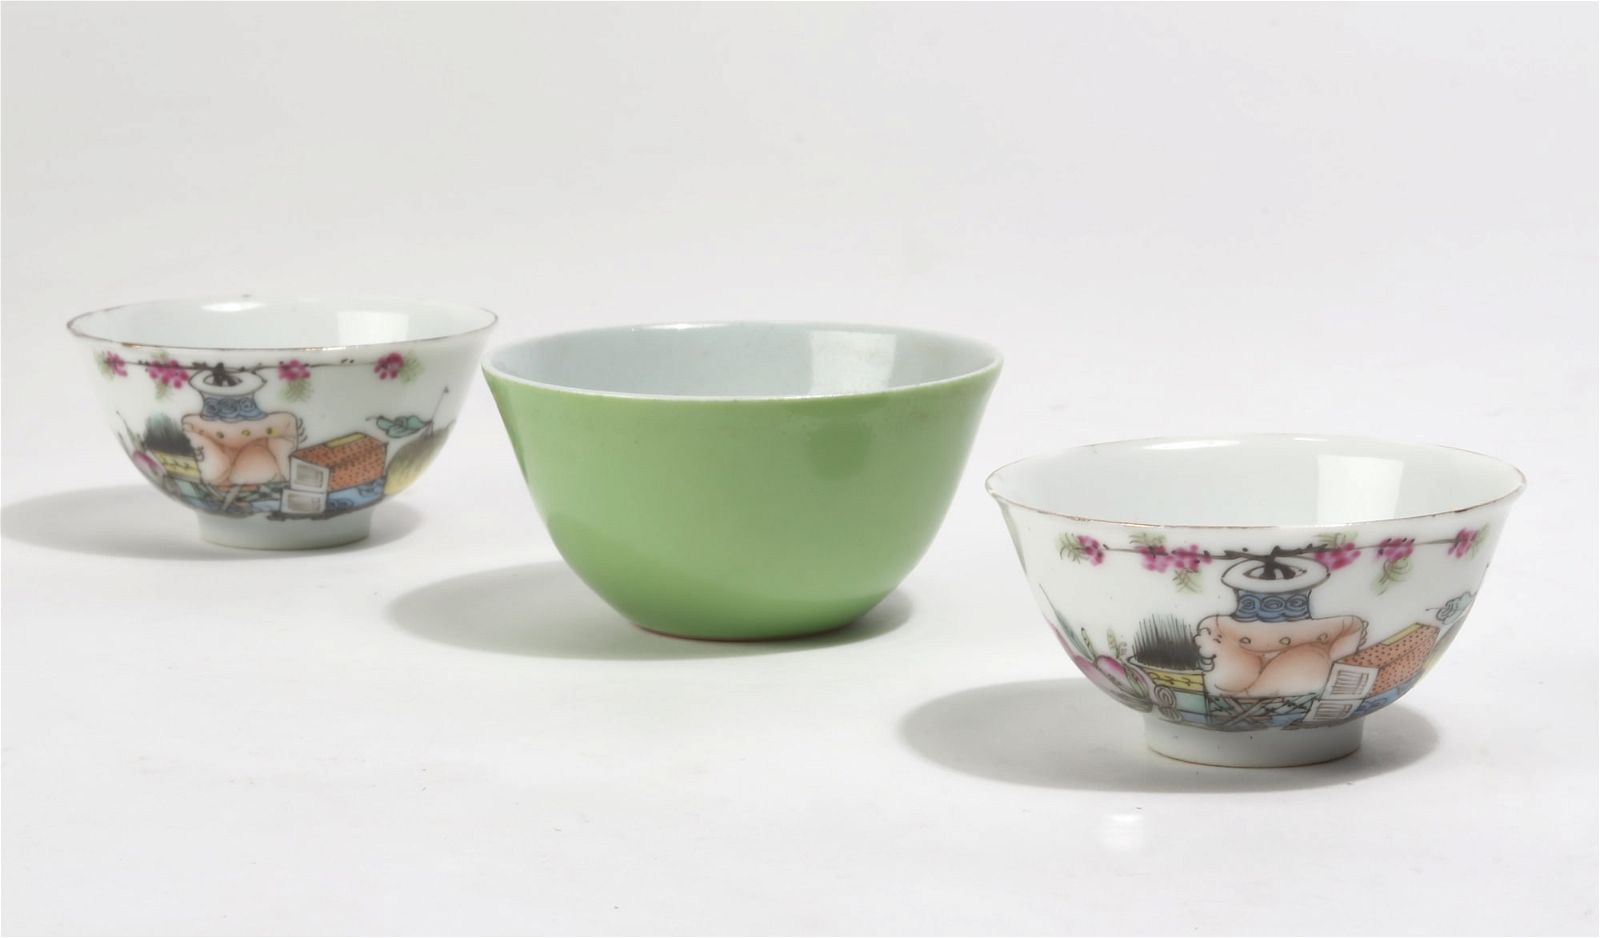 THREE SMALL CHINESE PORCELAIN CUPSThree 2fb3a76